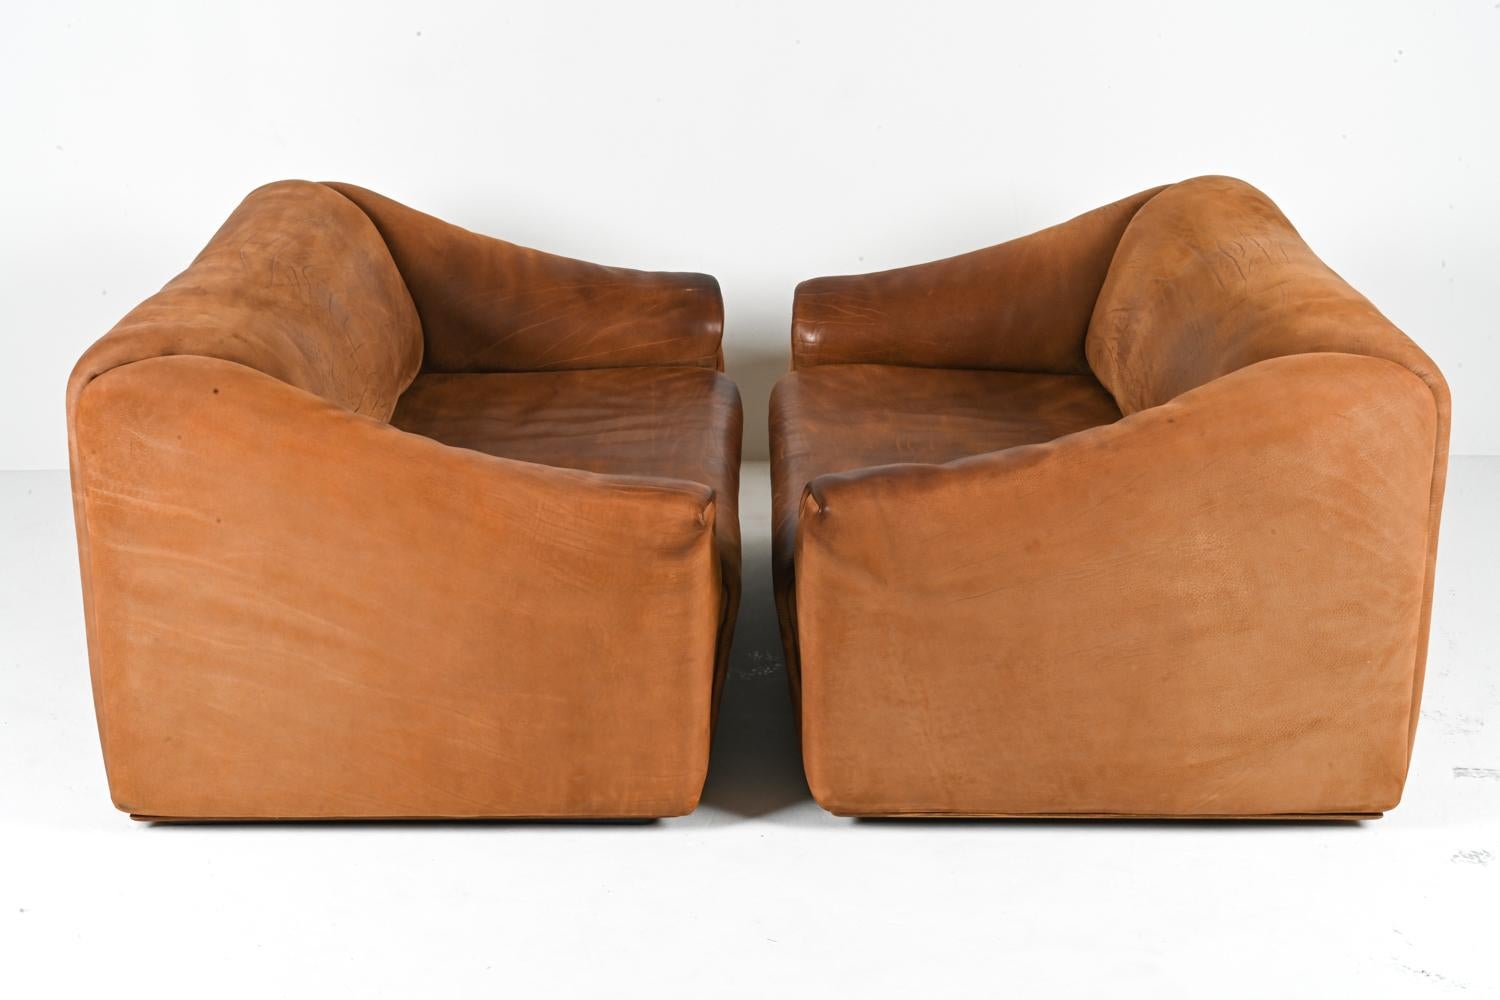 Pair of De Sede DS-47 Two-Seat Sofas in Nubuck Leather, c. 1970's For Sale 7